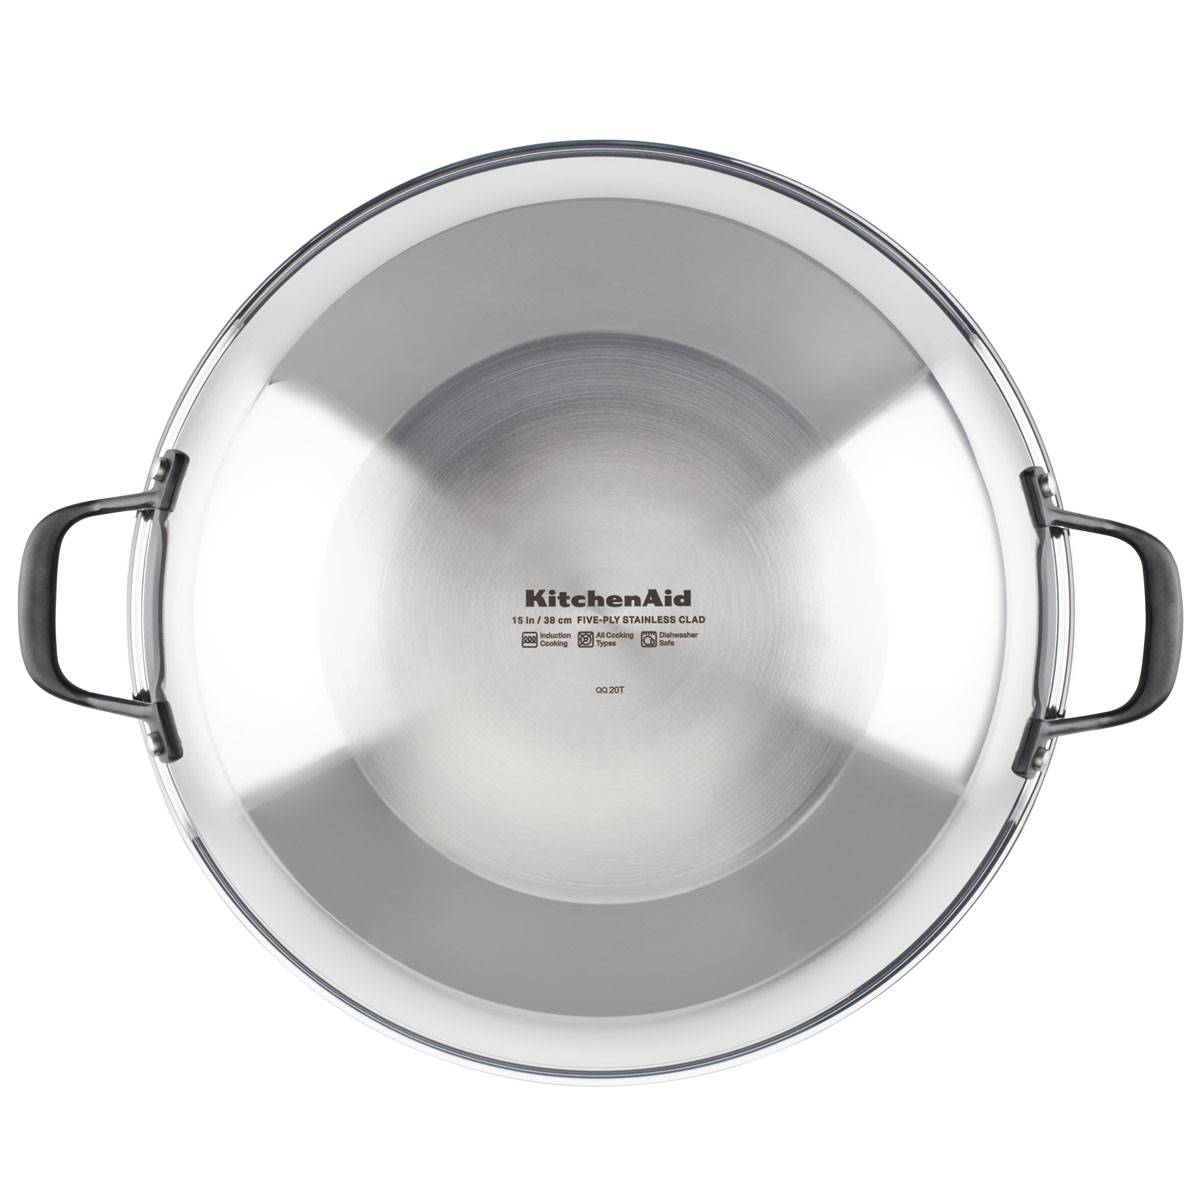 KitchenAid(R) 15in. 5-Ply Clad Stainless Steel Wok